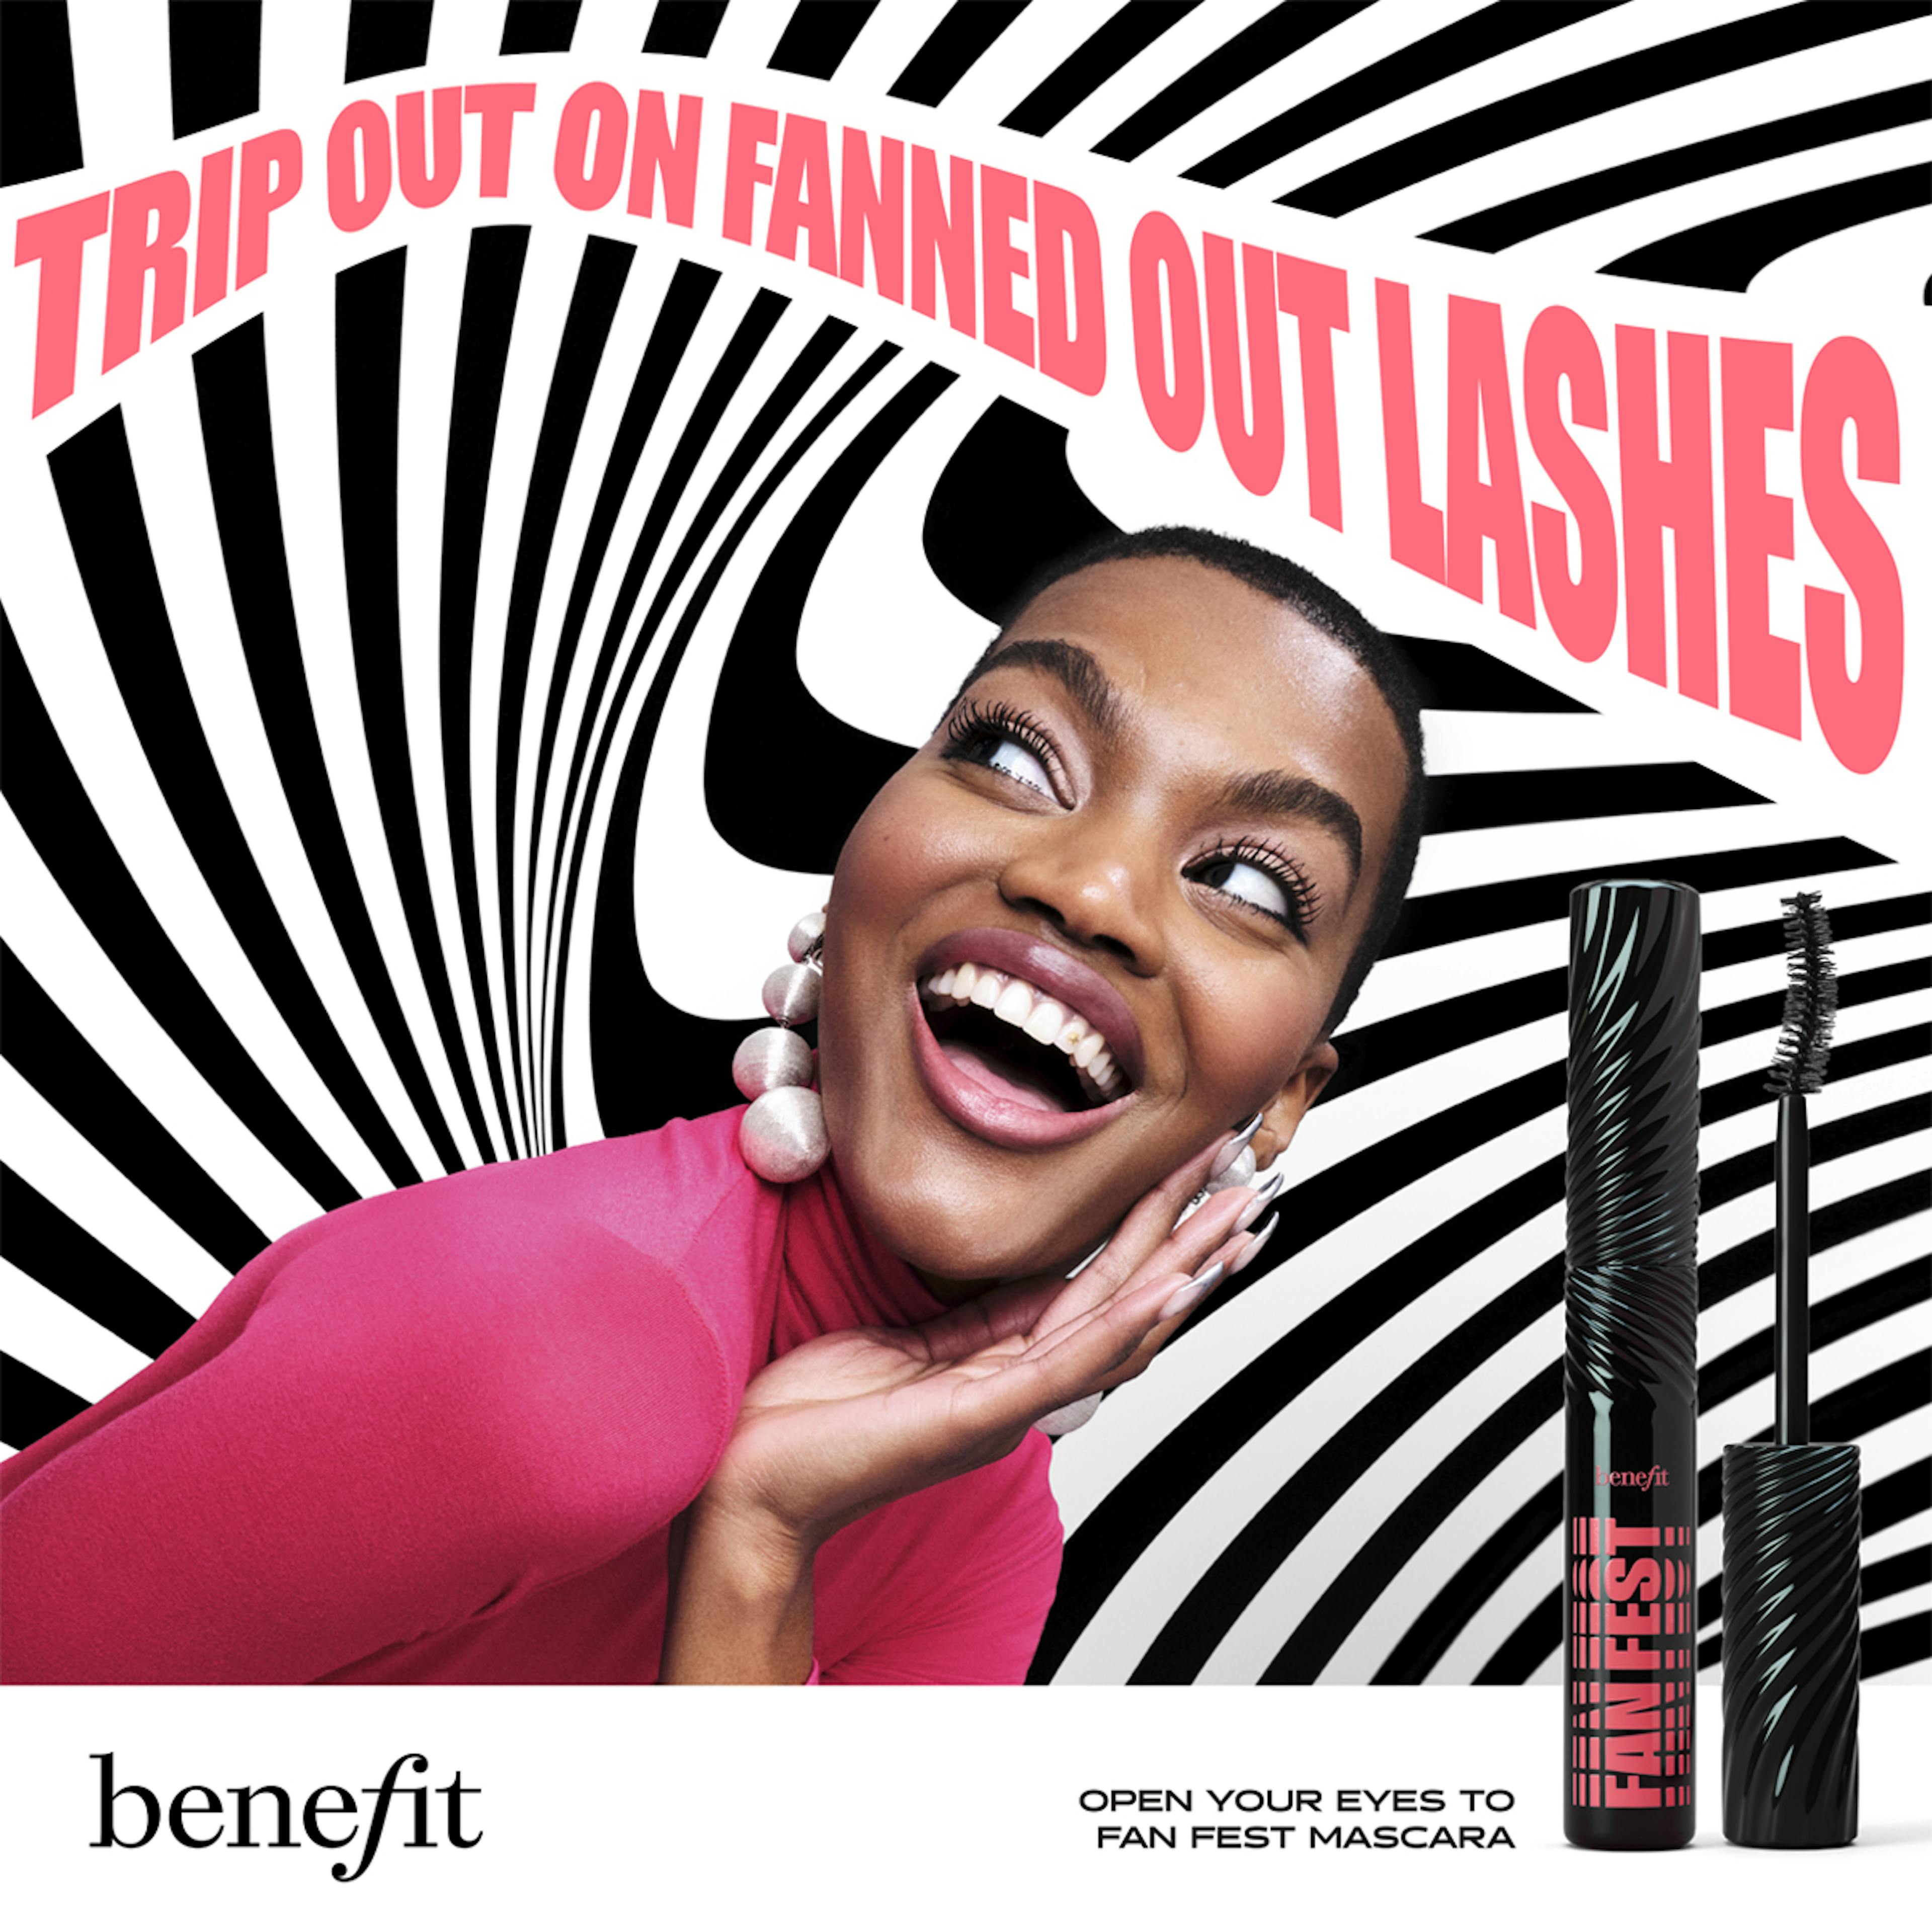 Benefit is the #1 prestige mascara brand* in the US, UK & Canada.  *Source: Circana, Beauty Trends, US, UK, Canada Prestige Brand Classification, Makeup Value and Unit Sales, January 2023 – December 2023